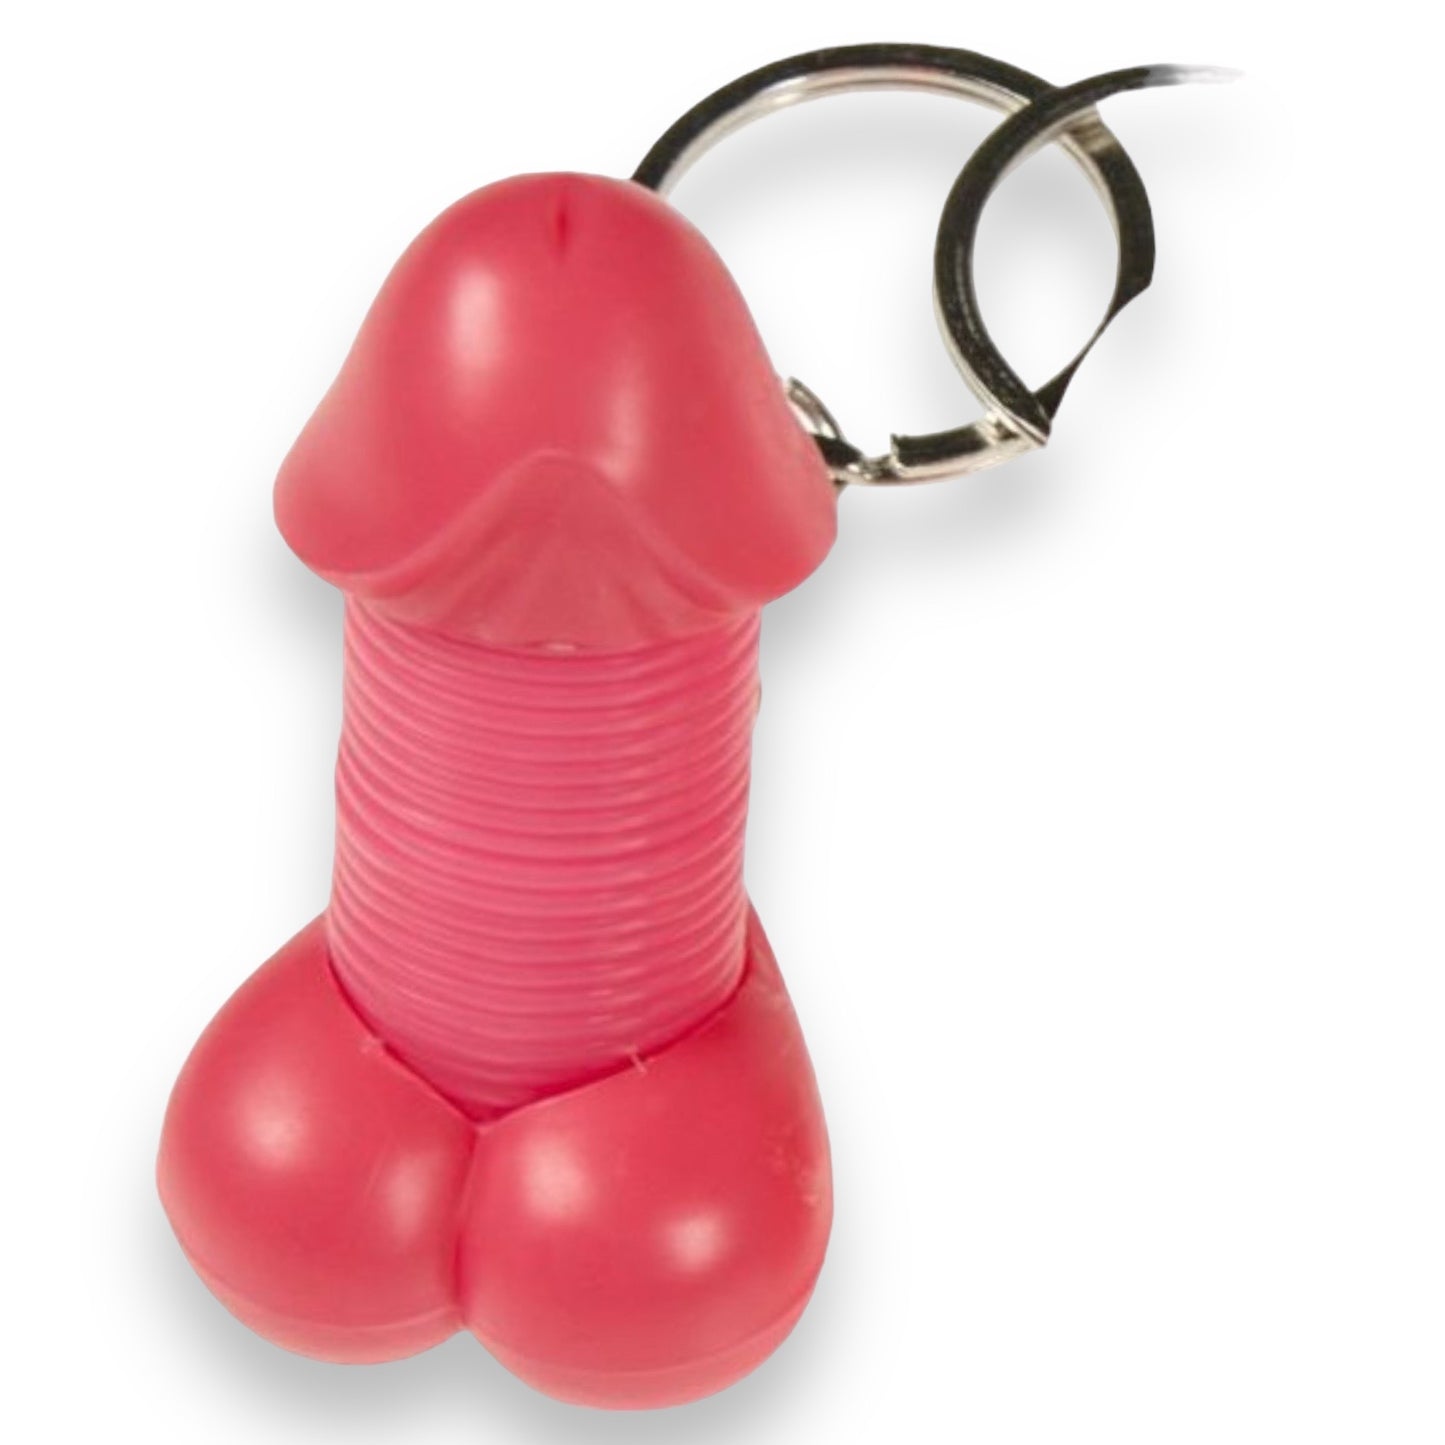 Colorful Penis Keychain - Funny Accessory for Your Bunch of Keys